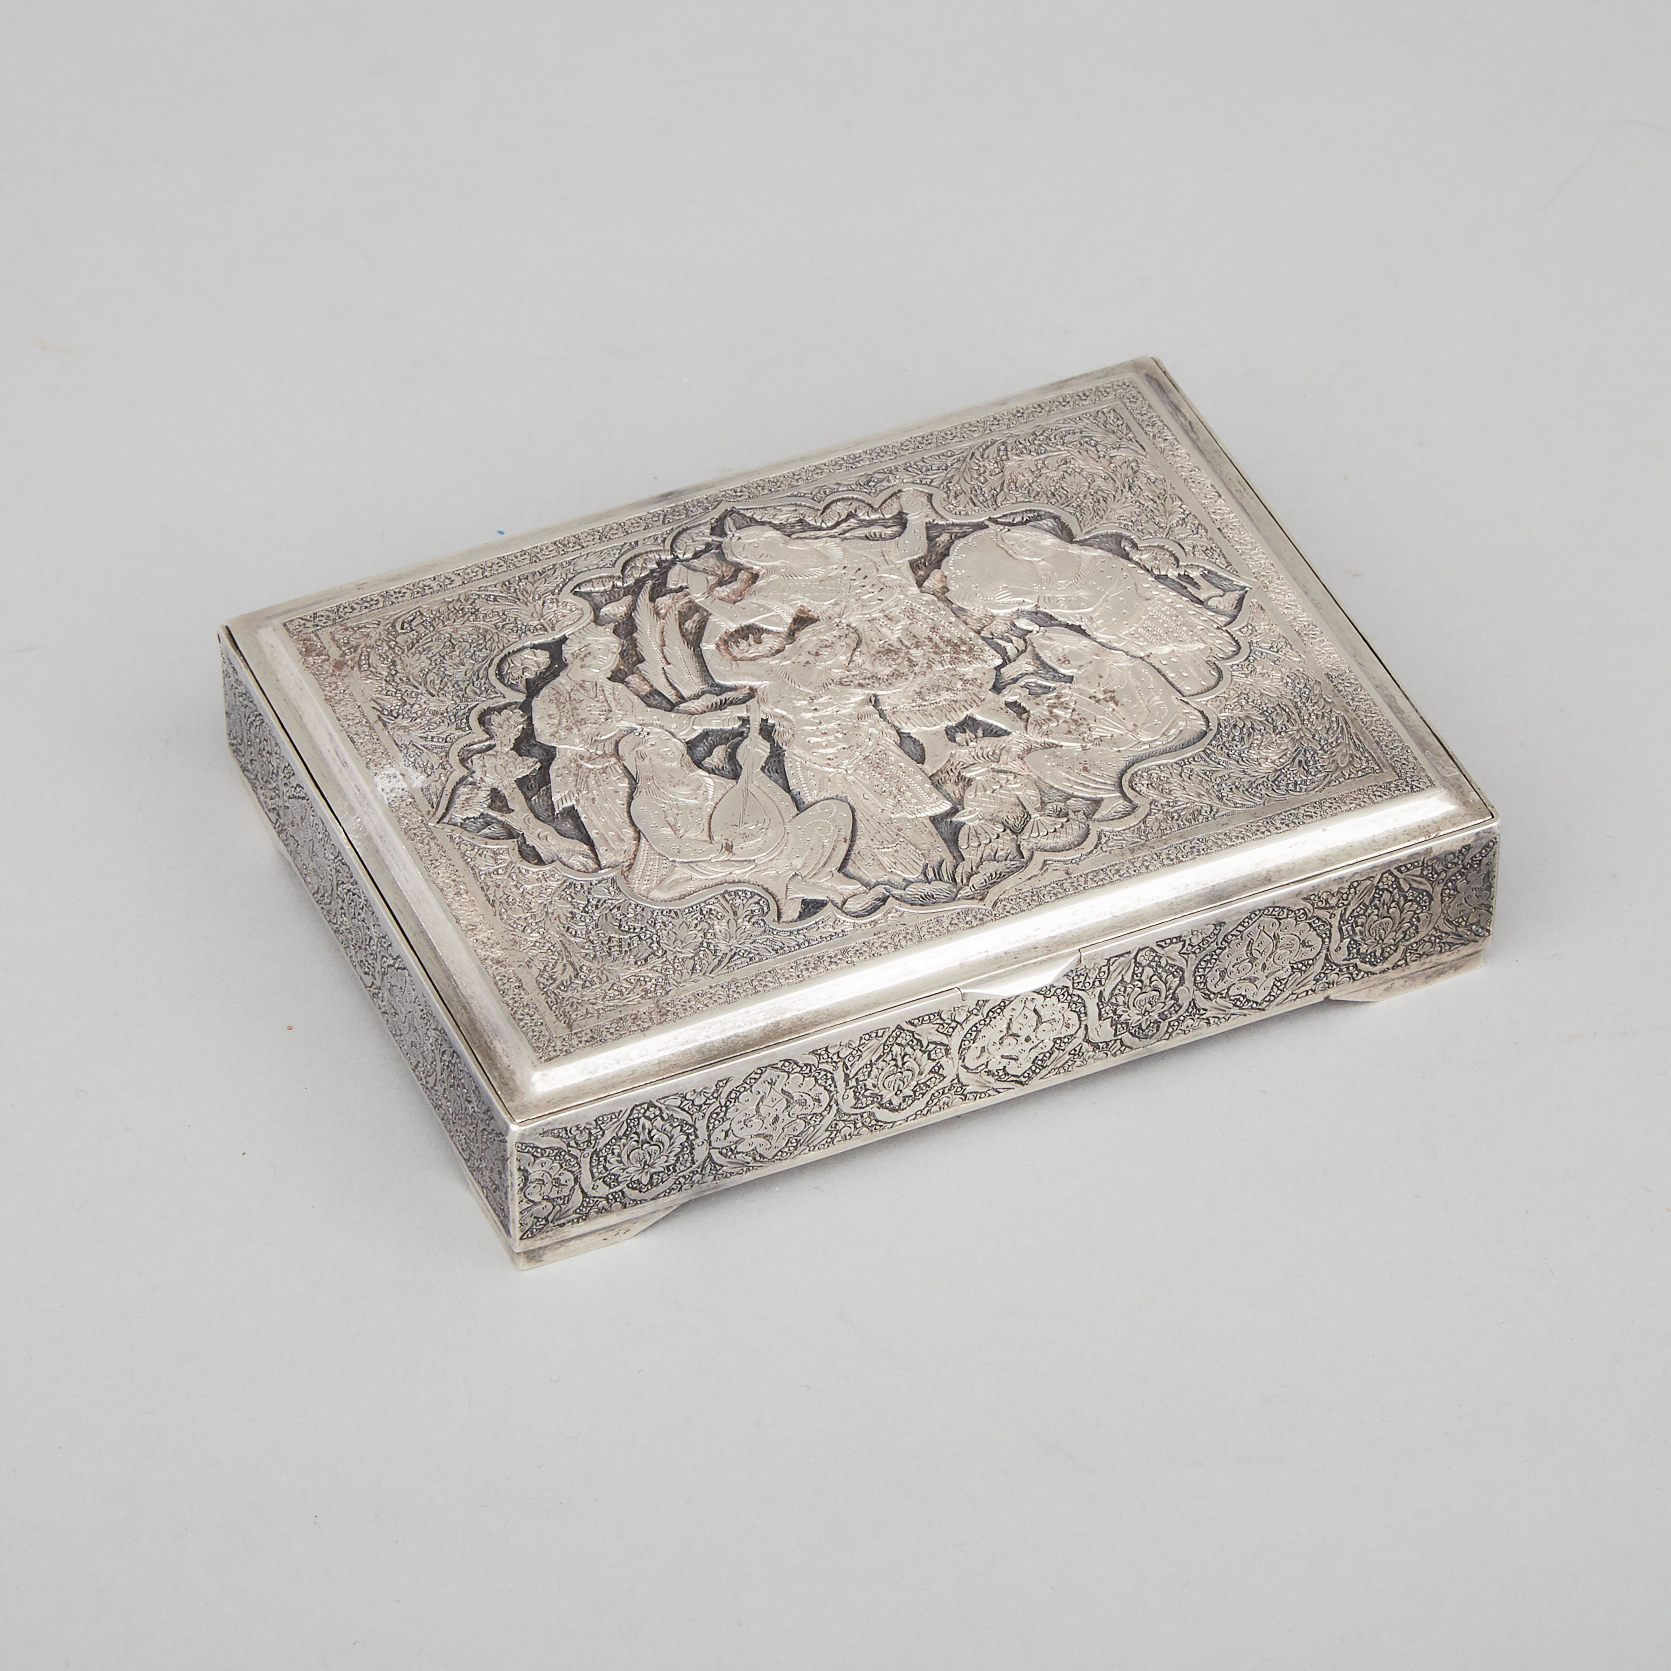 Middle-Eastern Silver Rectangular Box, 20th century